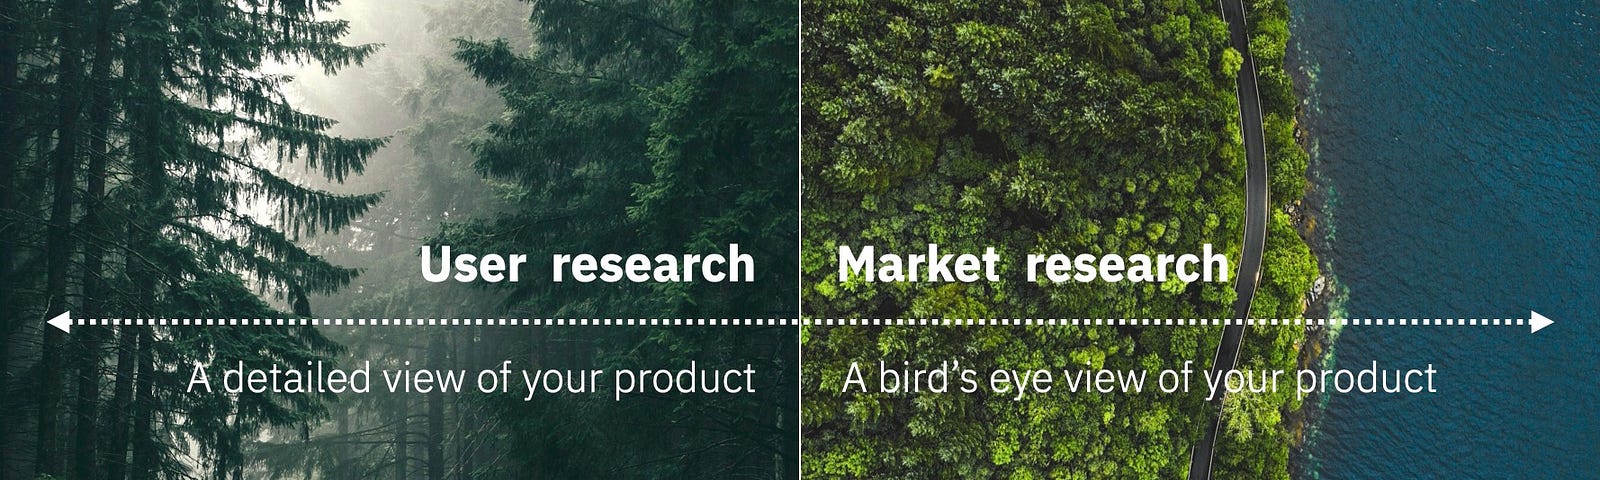 Market research provides a bird’s eye view of your product.